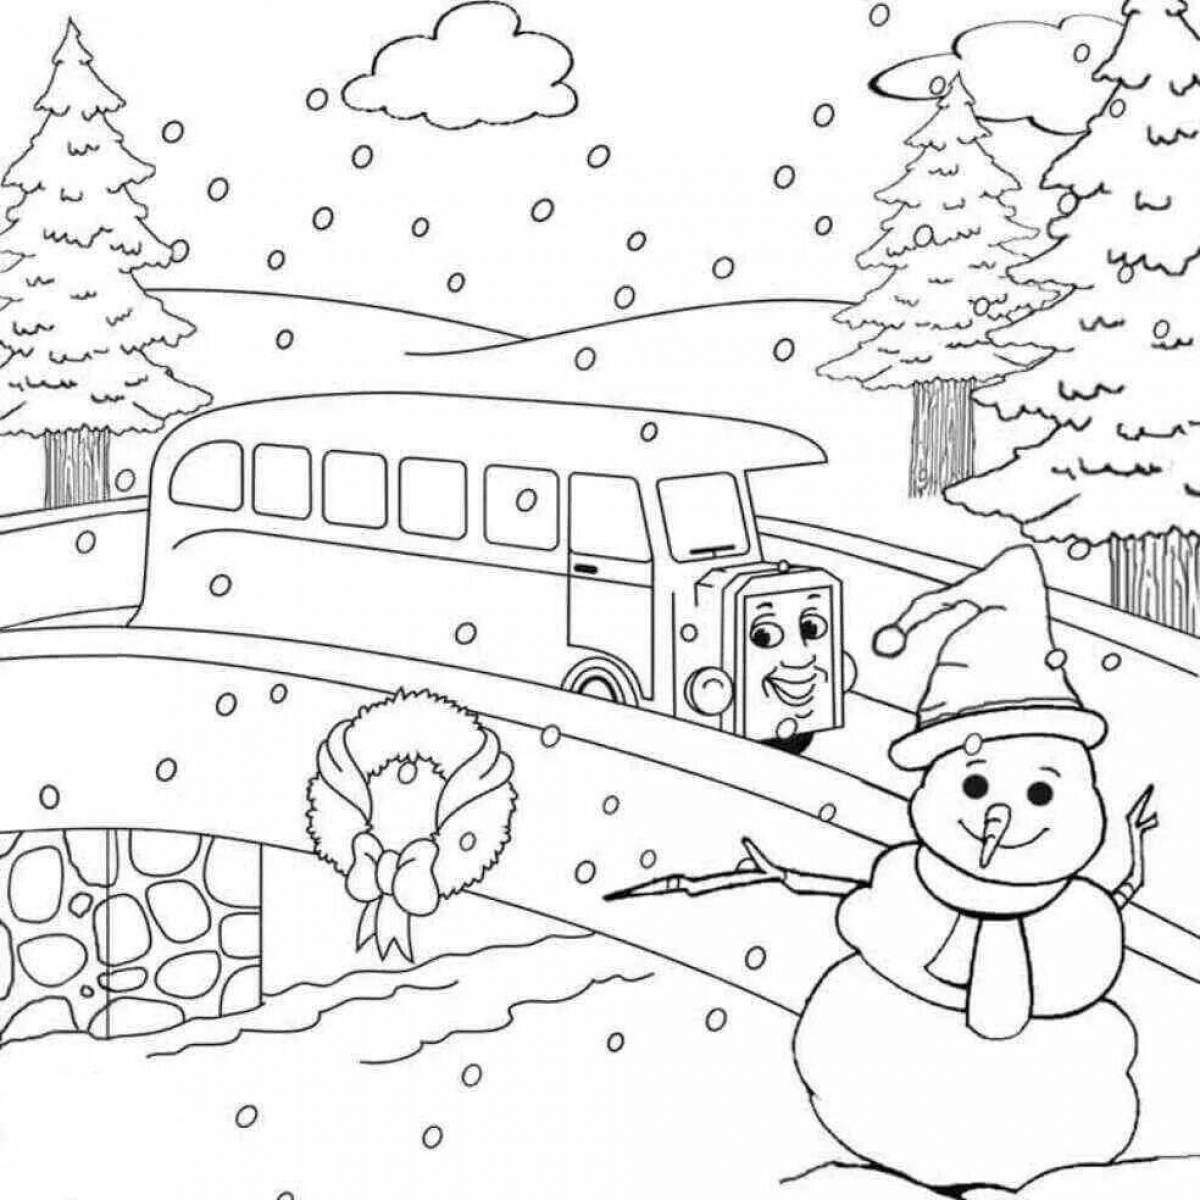 Glorious winter coloring book for kids 4 5